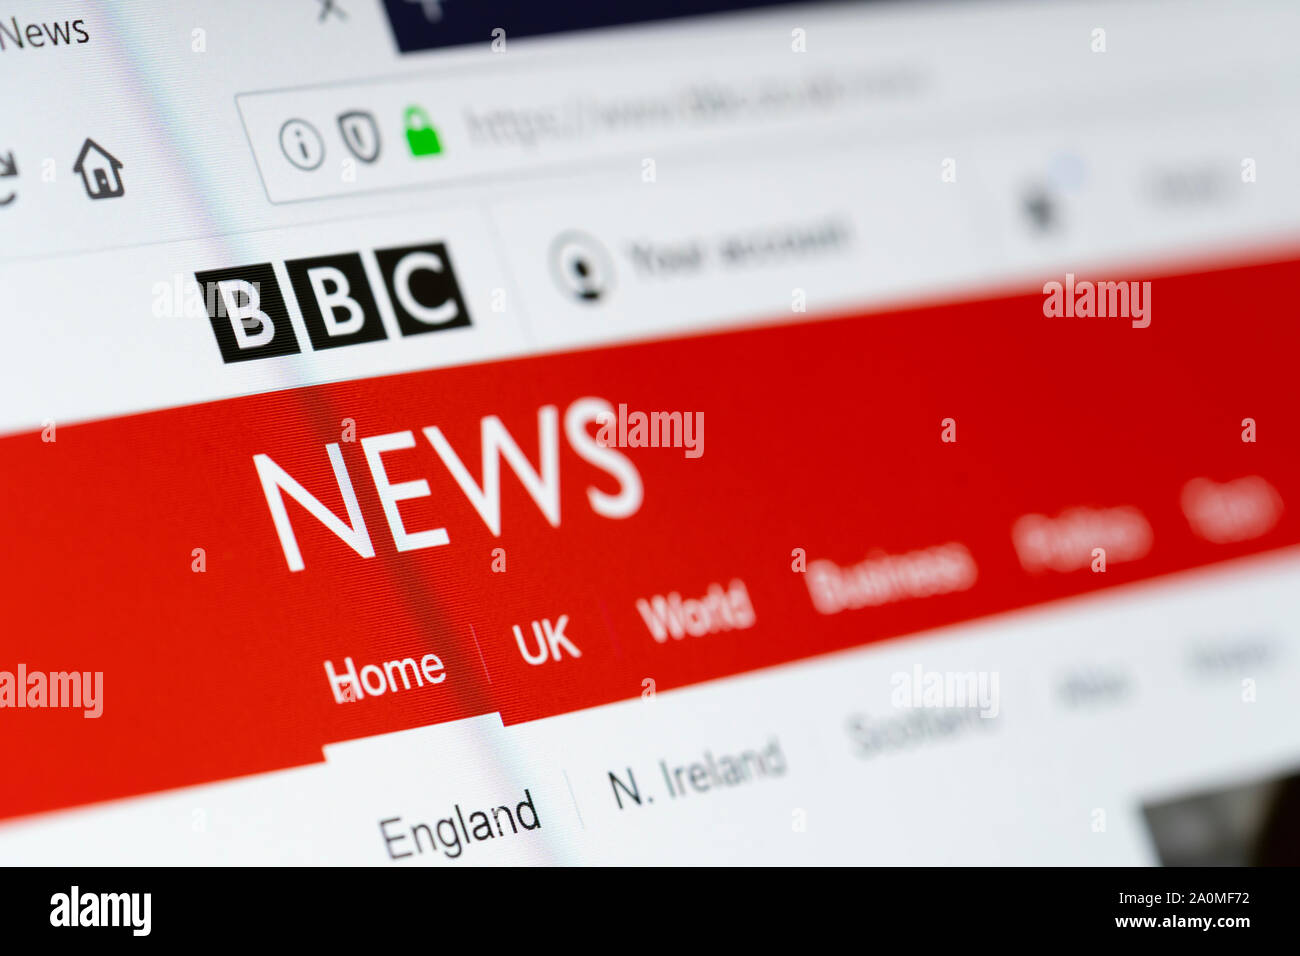 A closeup of a computer screen showing the BBC News website and logo. Concept: fake news, trusted media, woke media, trusted news source Stock Photo